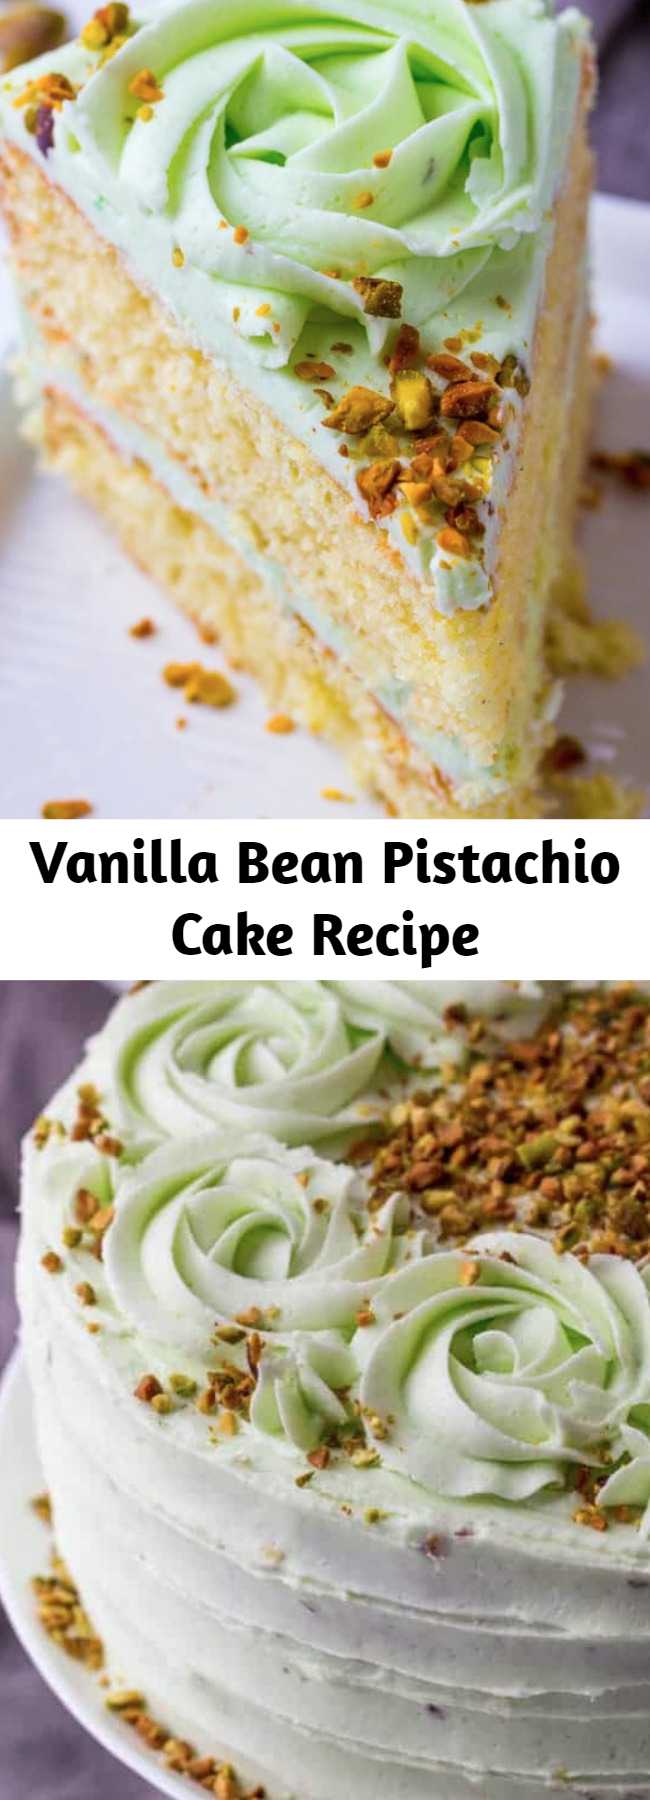 Vanilla Bean Pistachio Cake Recipe - Light, airy and full of flavor this Vanilla Bean Pistachio Cake is a fun and tasty flavor combination perfect for absolutely any occasion.